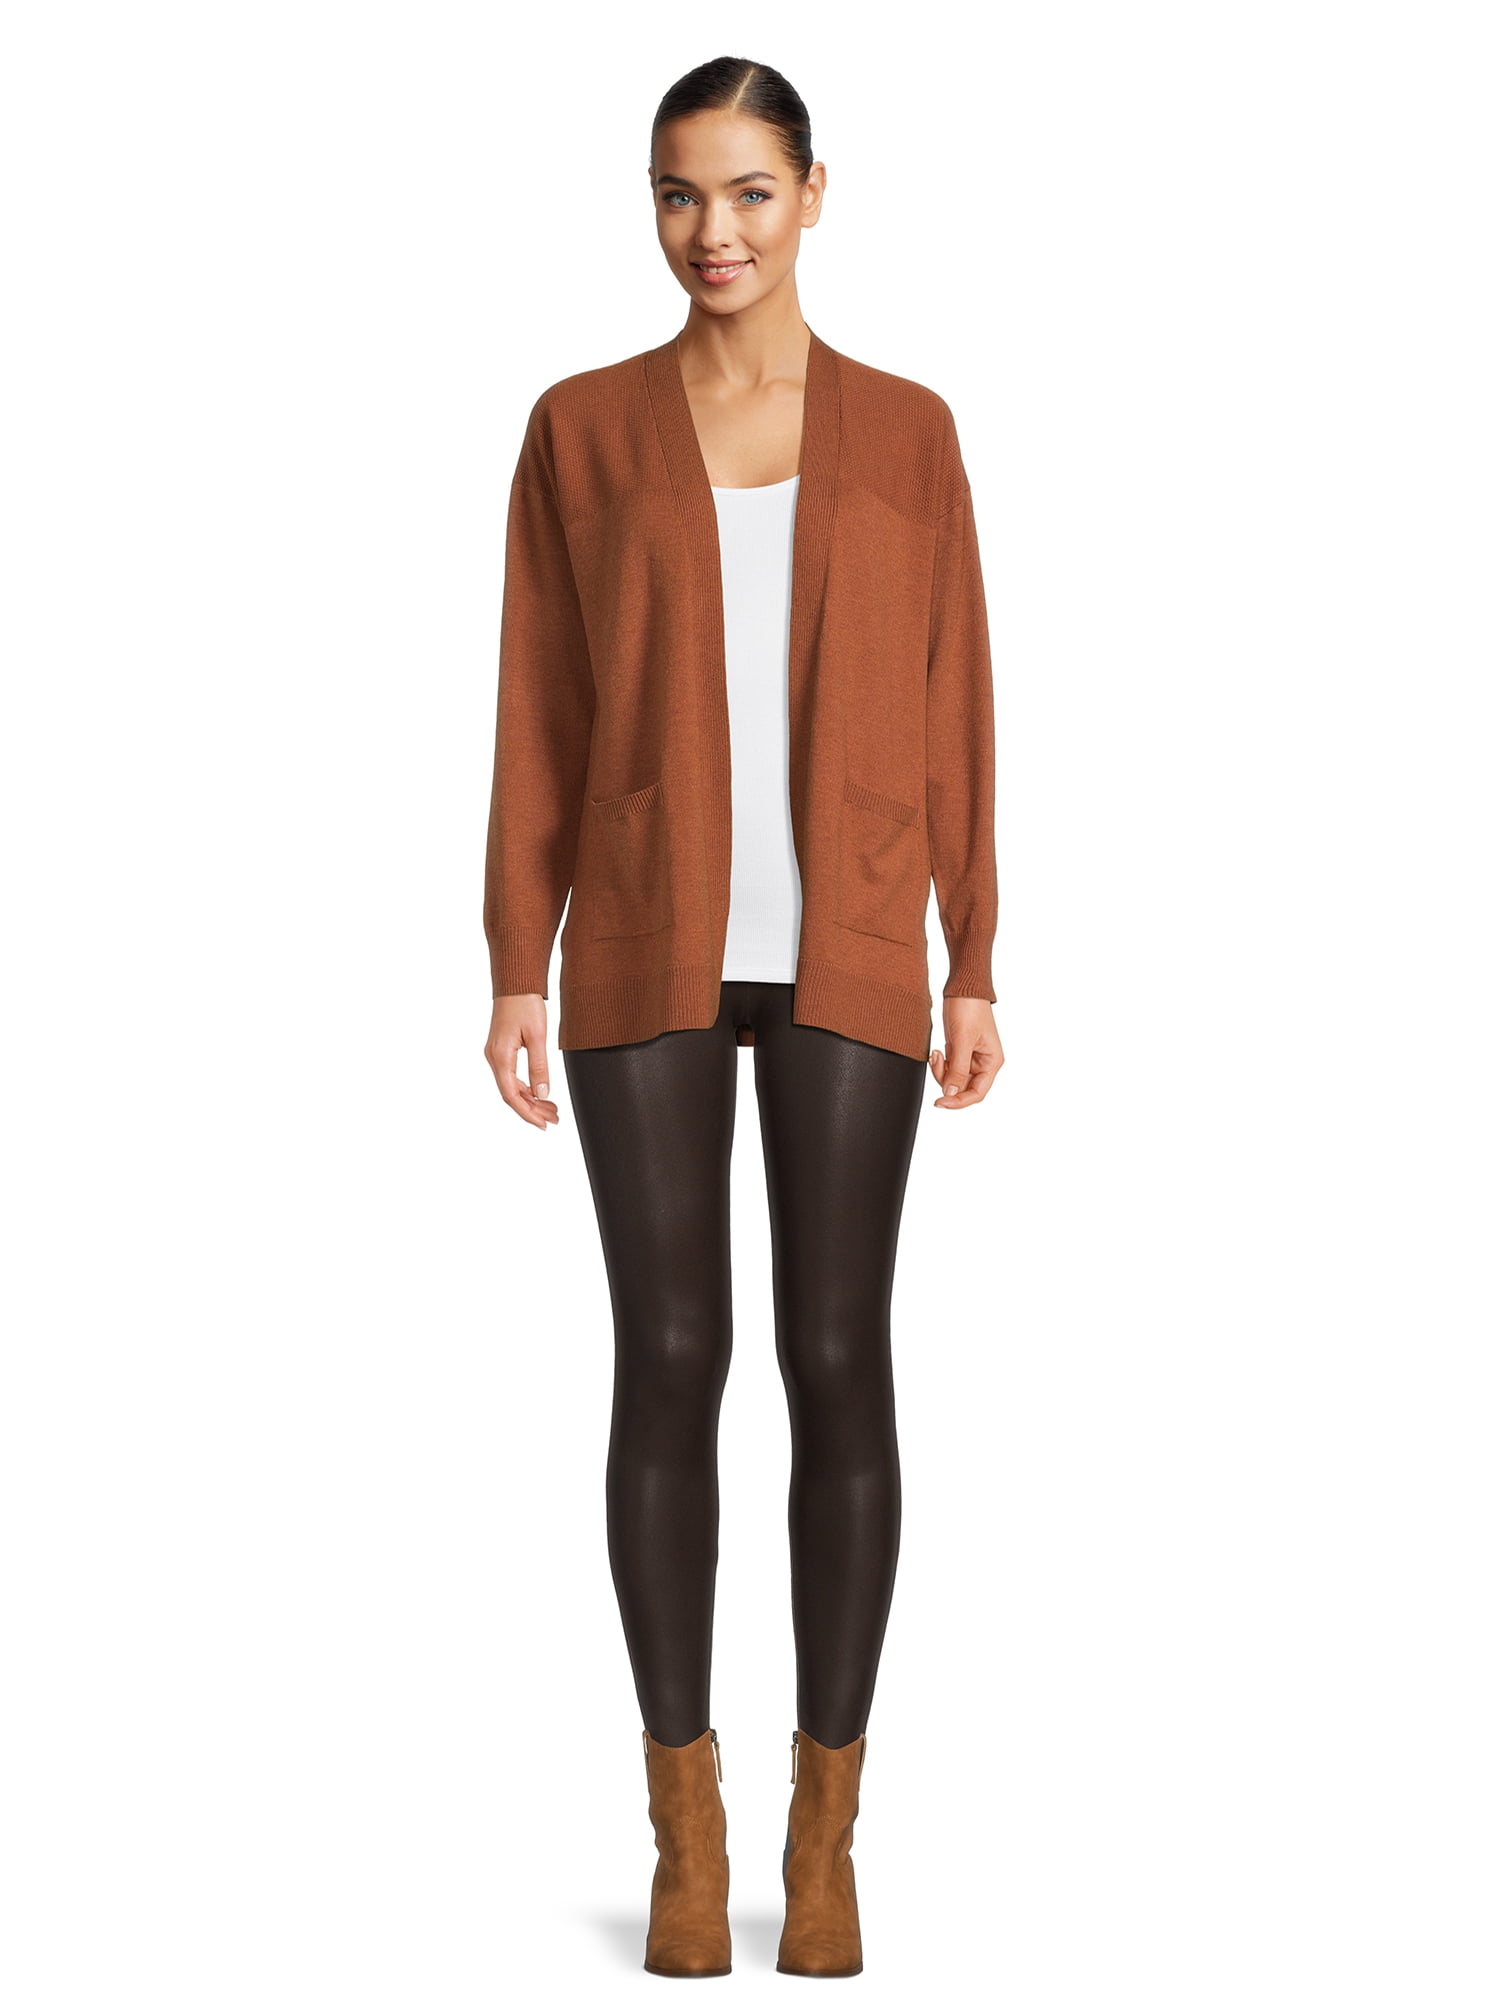 1. Leather Leggings In Caramel x A Little Bit Of this Sweater Top in Tan.  2. Leather Leggings in Brown x A Little Bit Of this Sweater To